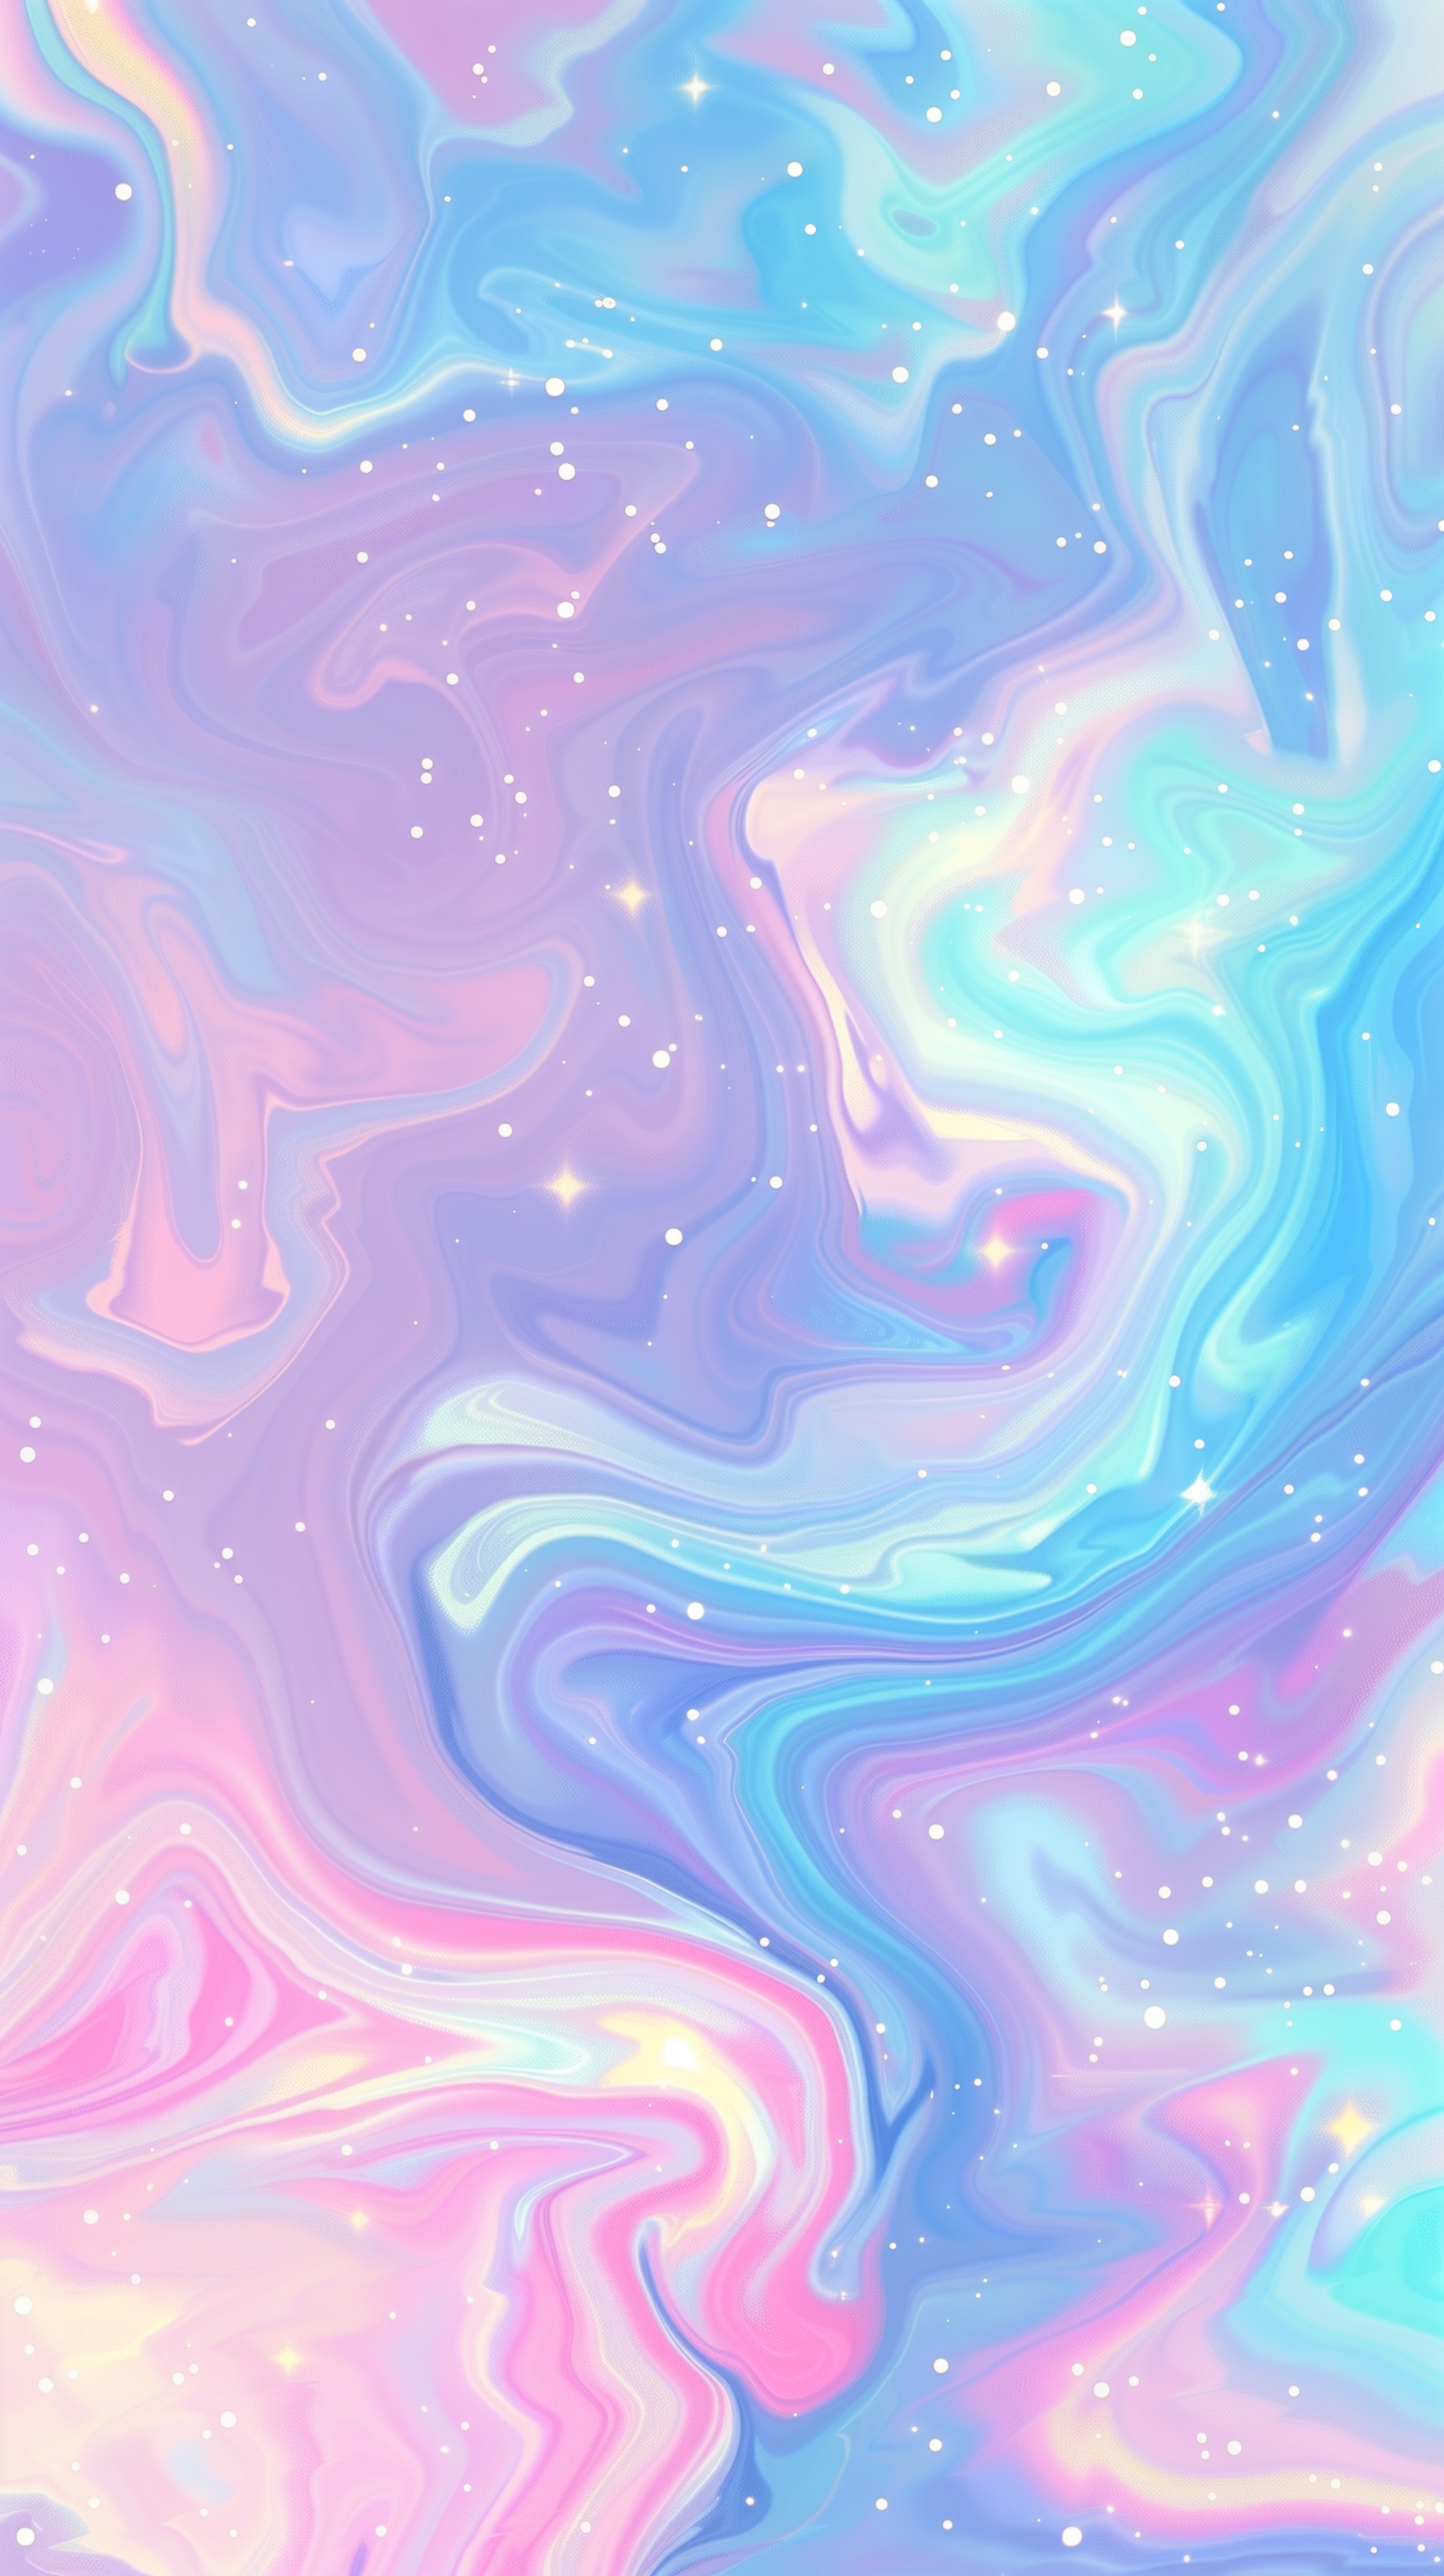 Colorful Swirls of Pink and Blue Wallpaper[68dfb80c26194abb9aca]